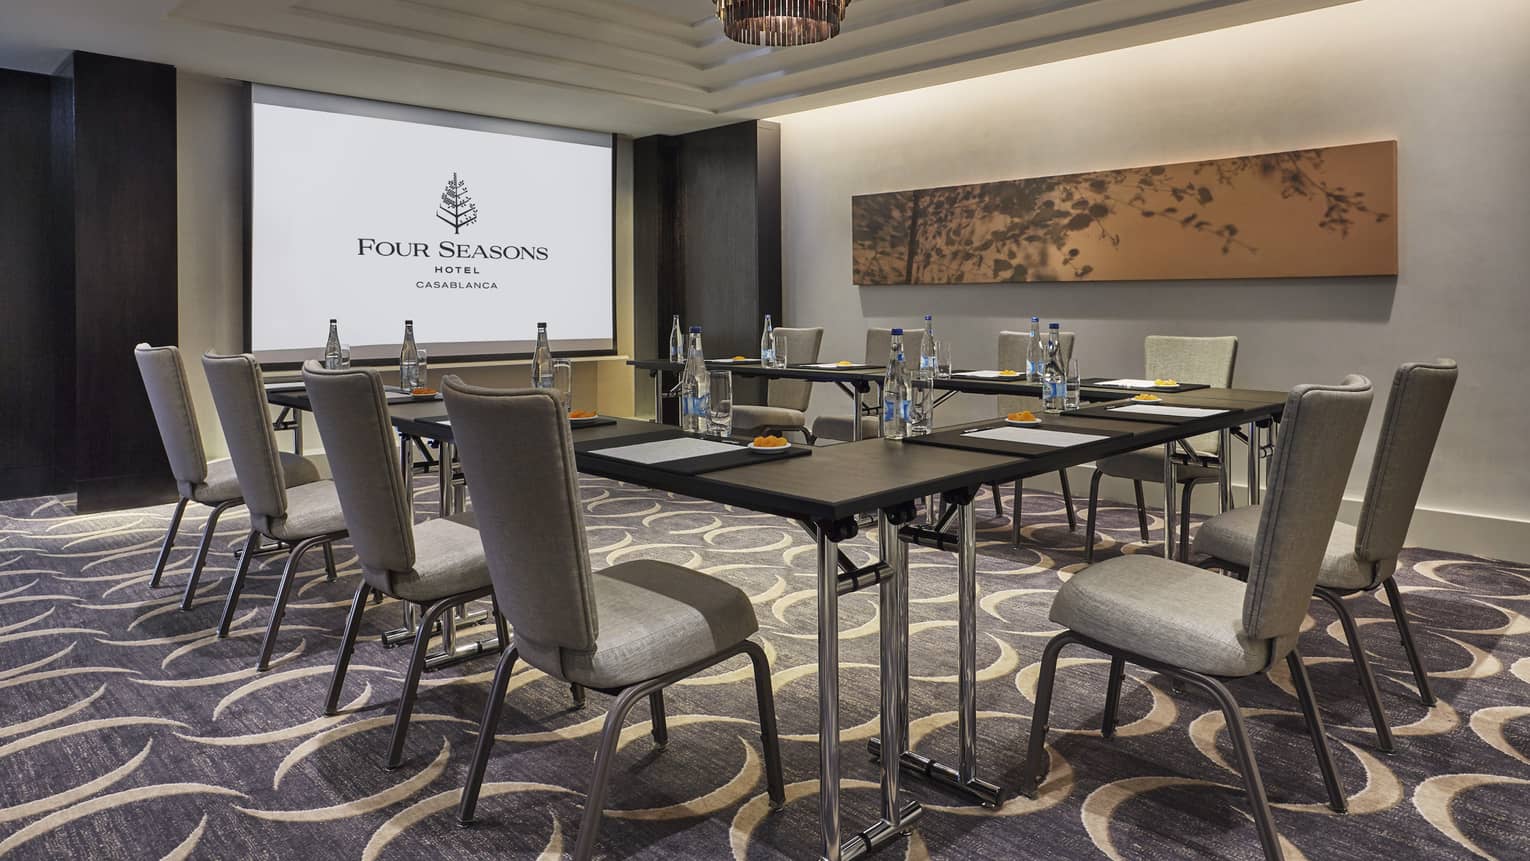 Business meeting room with large screen with Four Seasons logo, tables and chairs